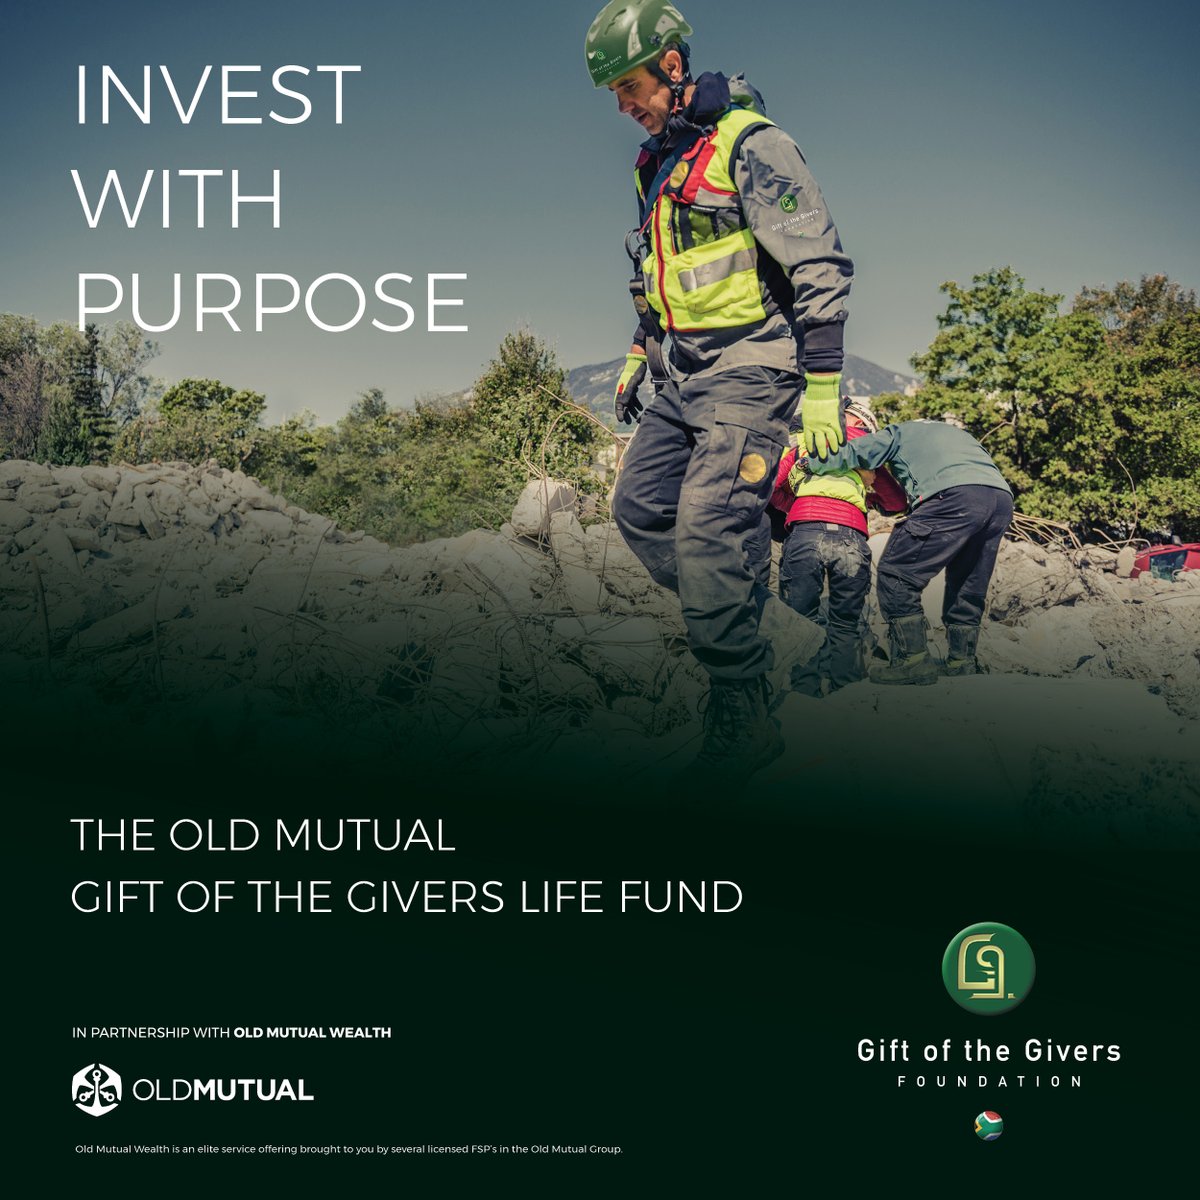 Sponsored: Gift of the Givers and Old Mutual Wealth have partnered to launch the Old Mutual Gift of the Givers Life Fund where investors can invest with purpose. Learn more here: t.ly/I3ZLU #OldMutualWealth #GiftoftheGivers #MakeADifference